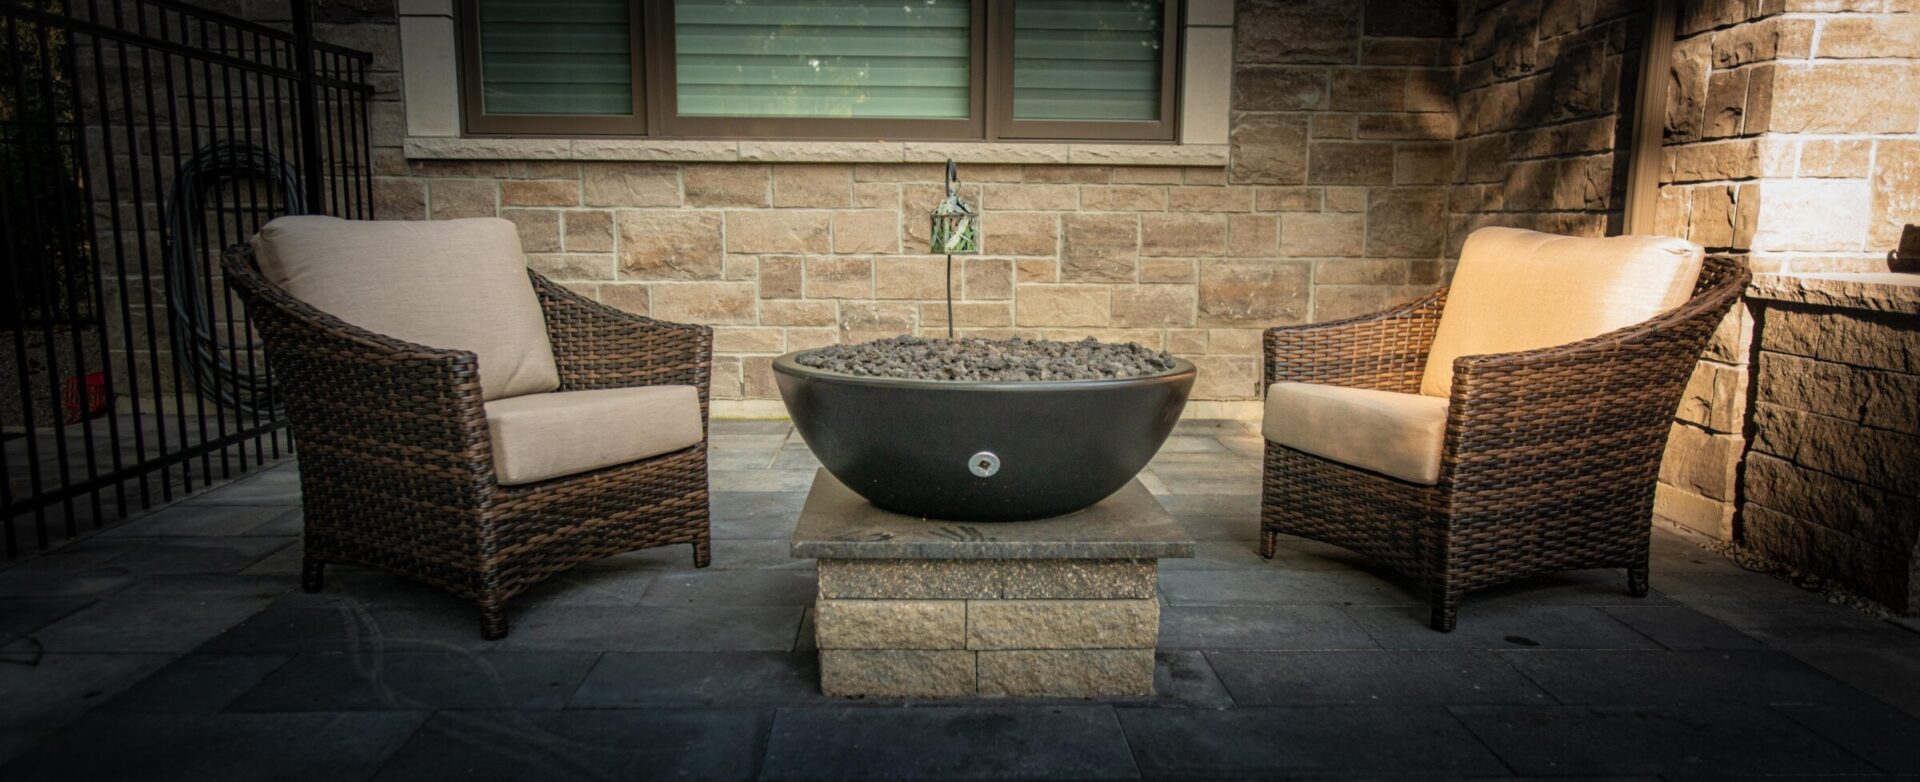 A cozy outdoor seating area with two wicker chairs facing each other across a fire bowl, set on a stone patio with a stone facade backdrop.